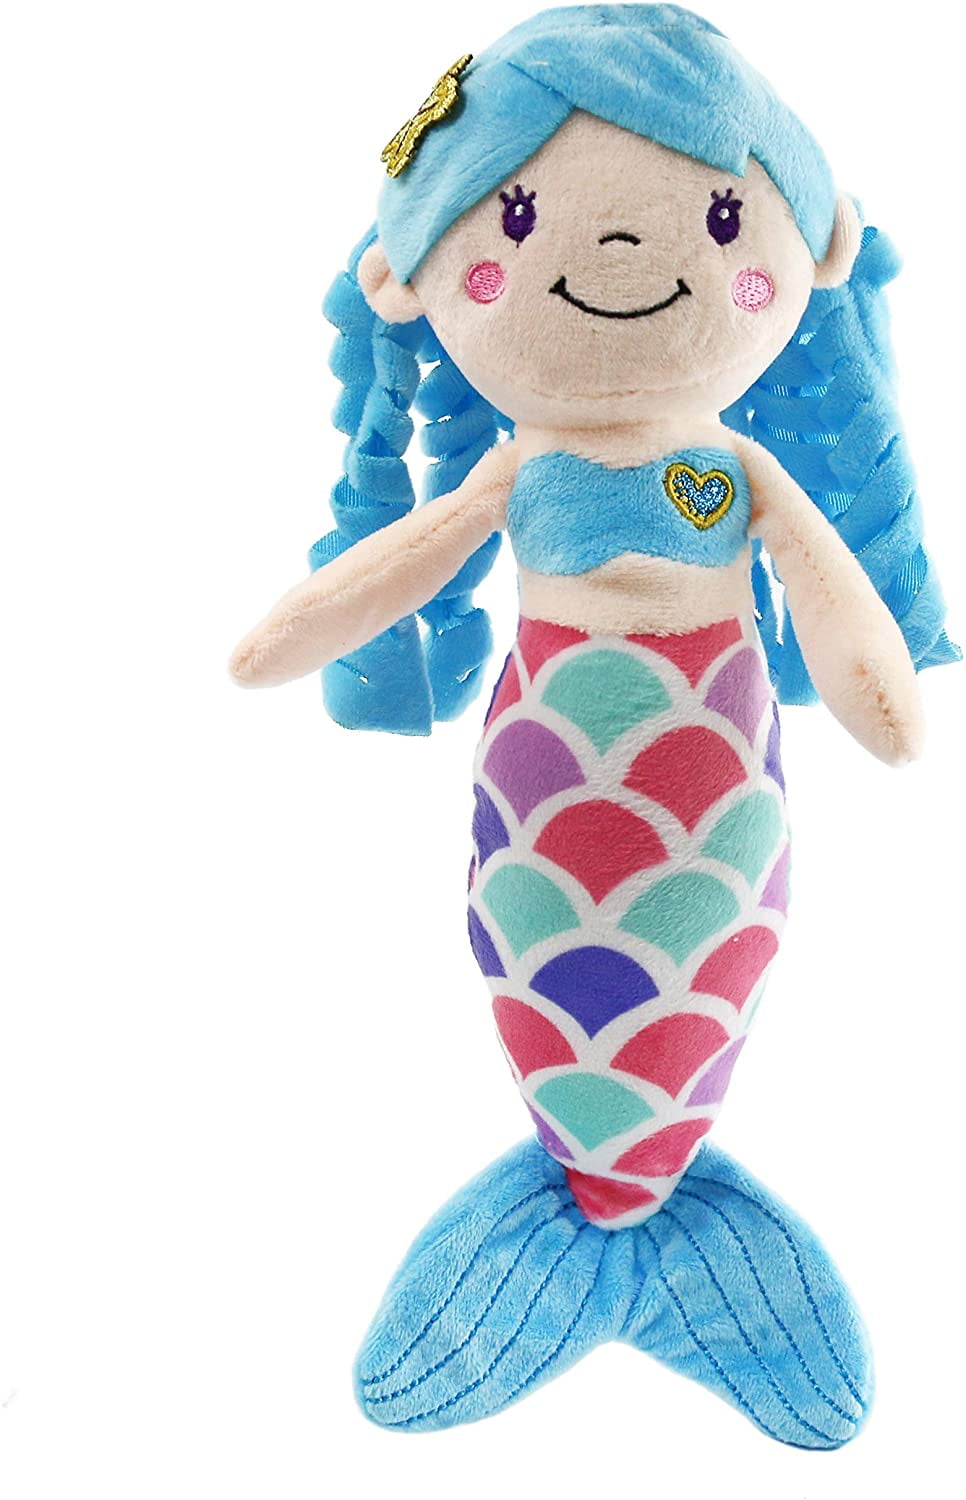 Mermaid Princess Stuffed Animals Soft Plush Doll Toys Gifts for Girls Kids  Toddlers, 12'' 